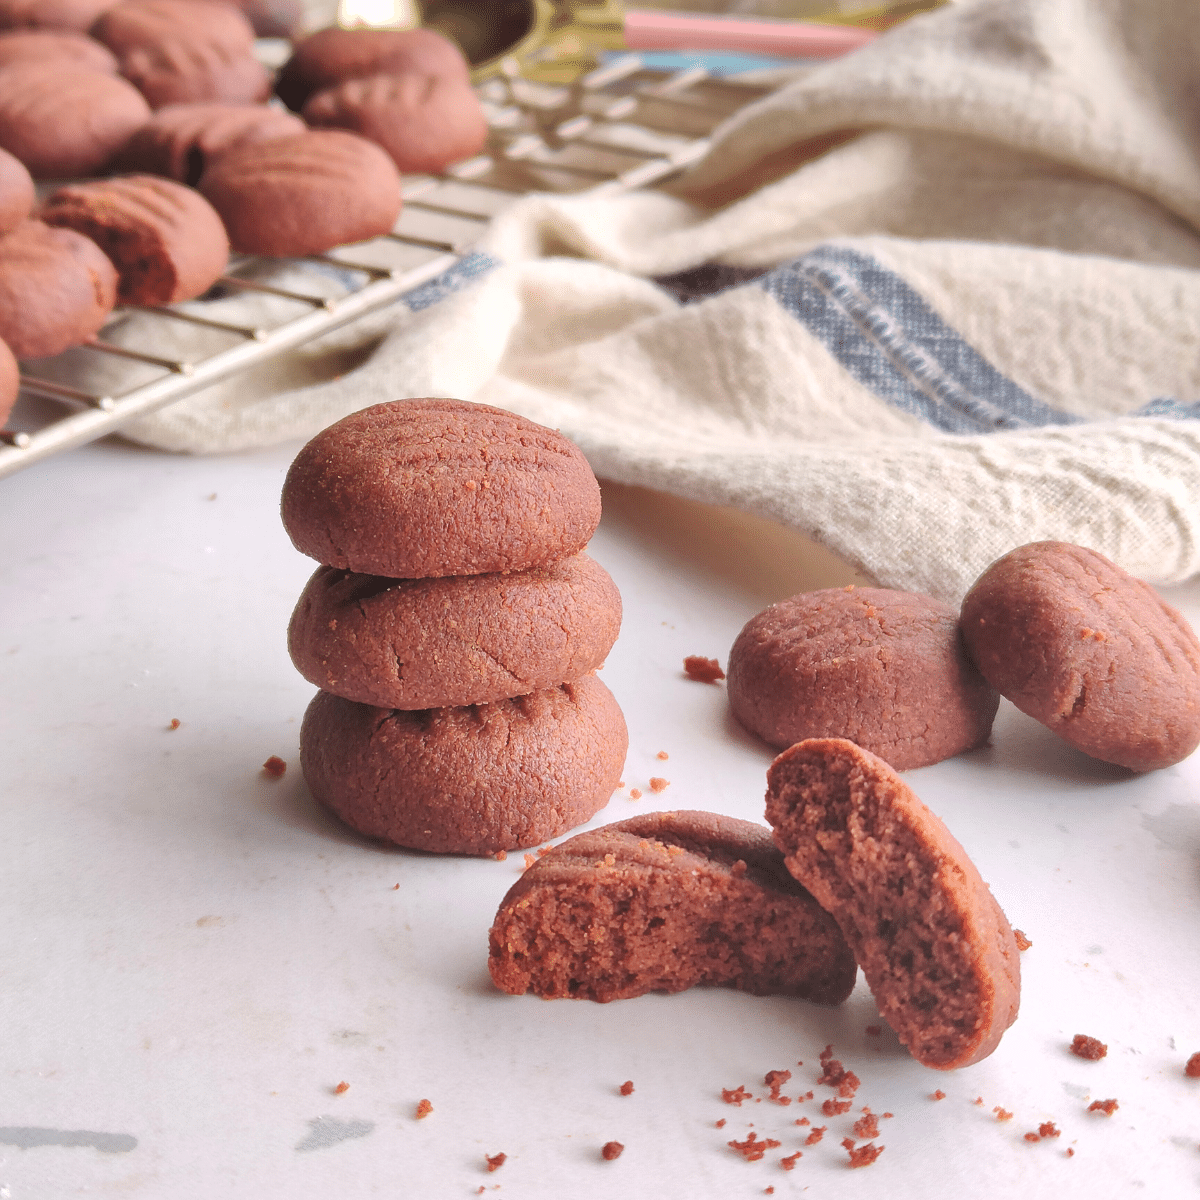 4 ingredient Mini Chocolate Butter Cookies chocolate cookies — rich, chocolatey and crisp!